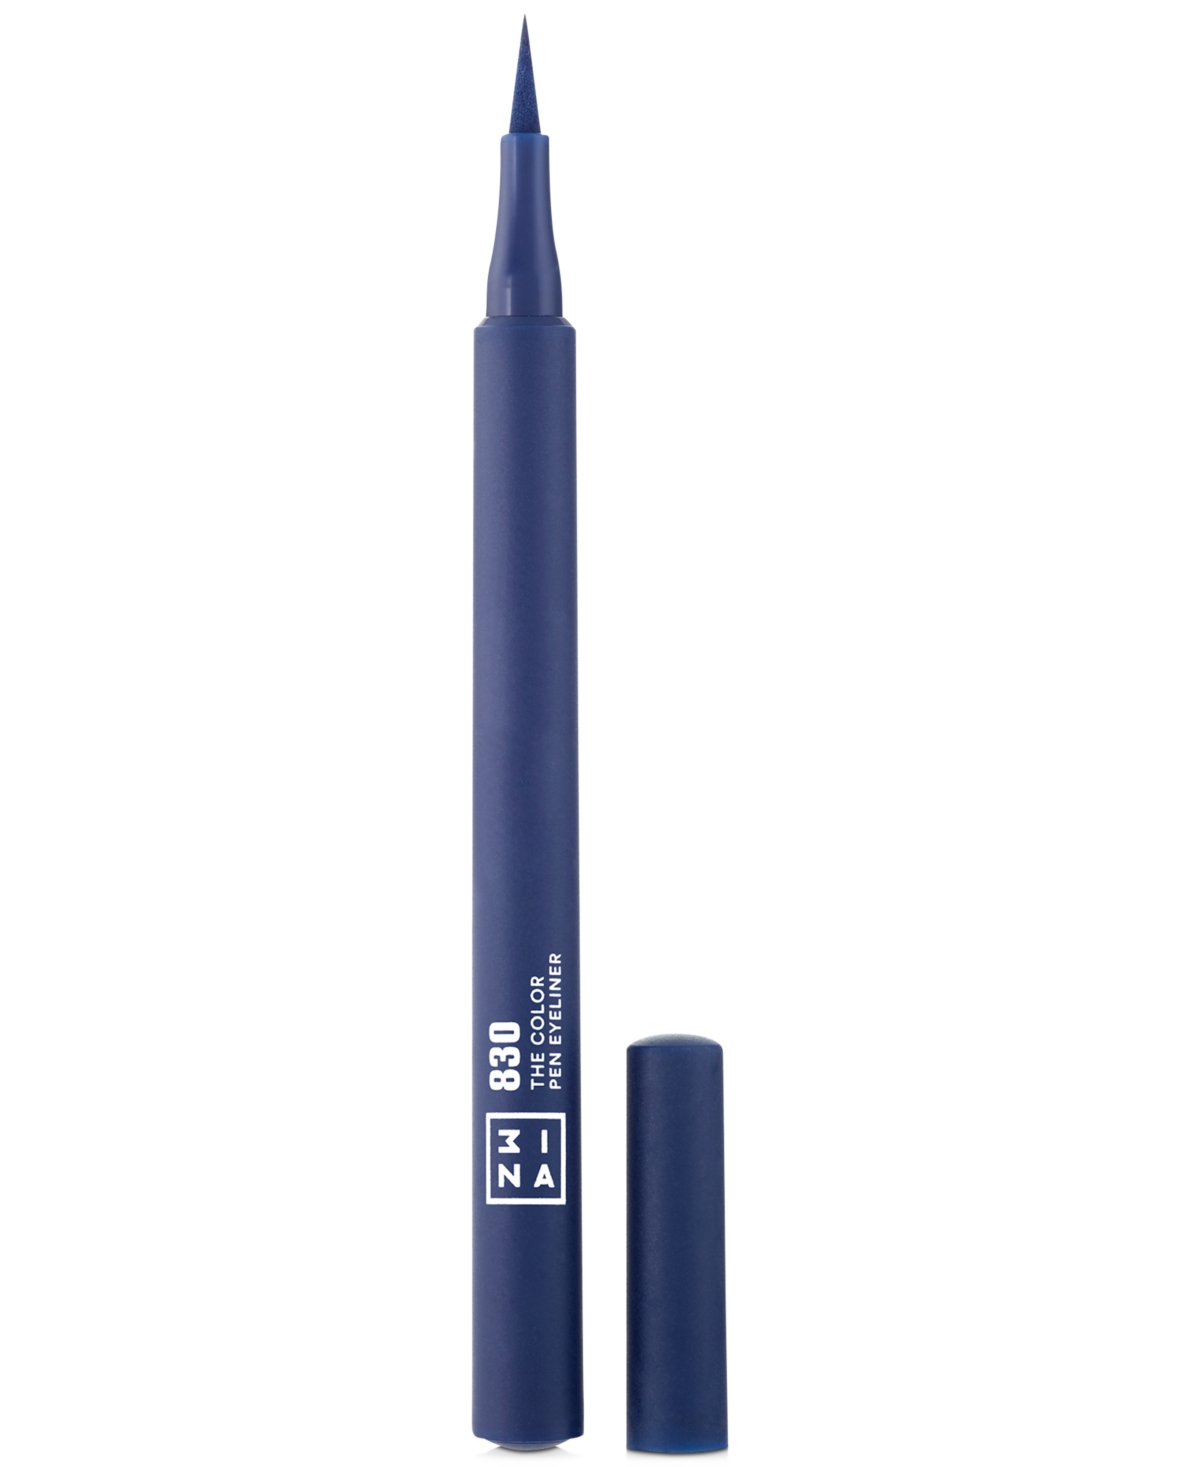 3ina The Color Pen Eyeliner In - Navy Blue